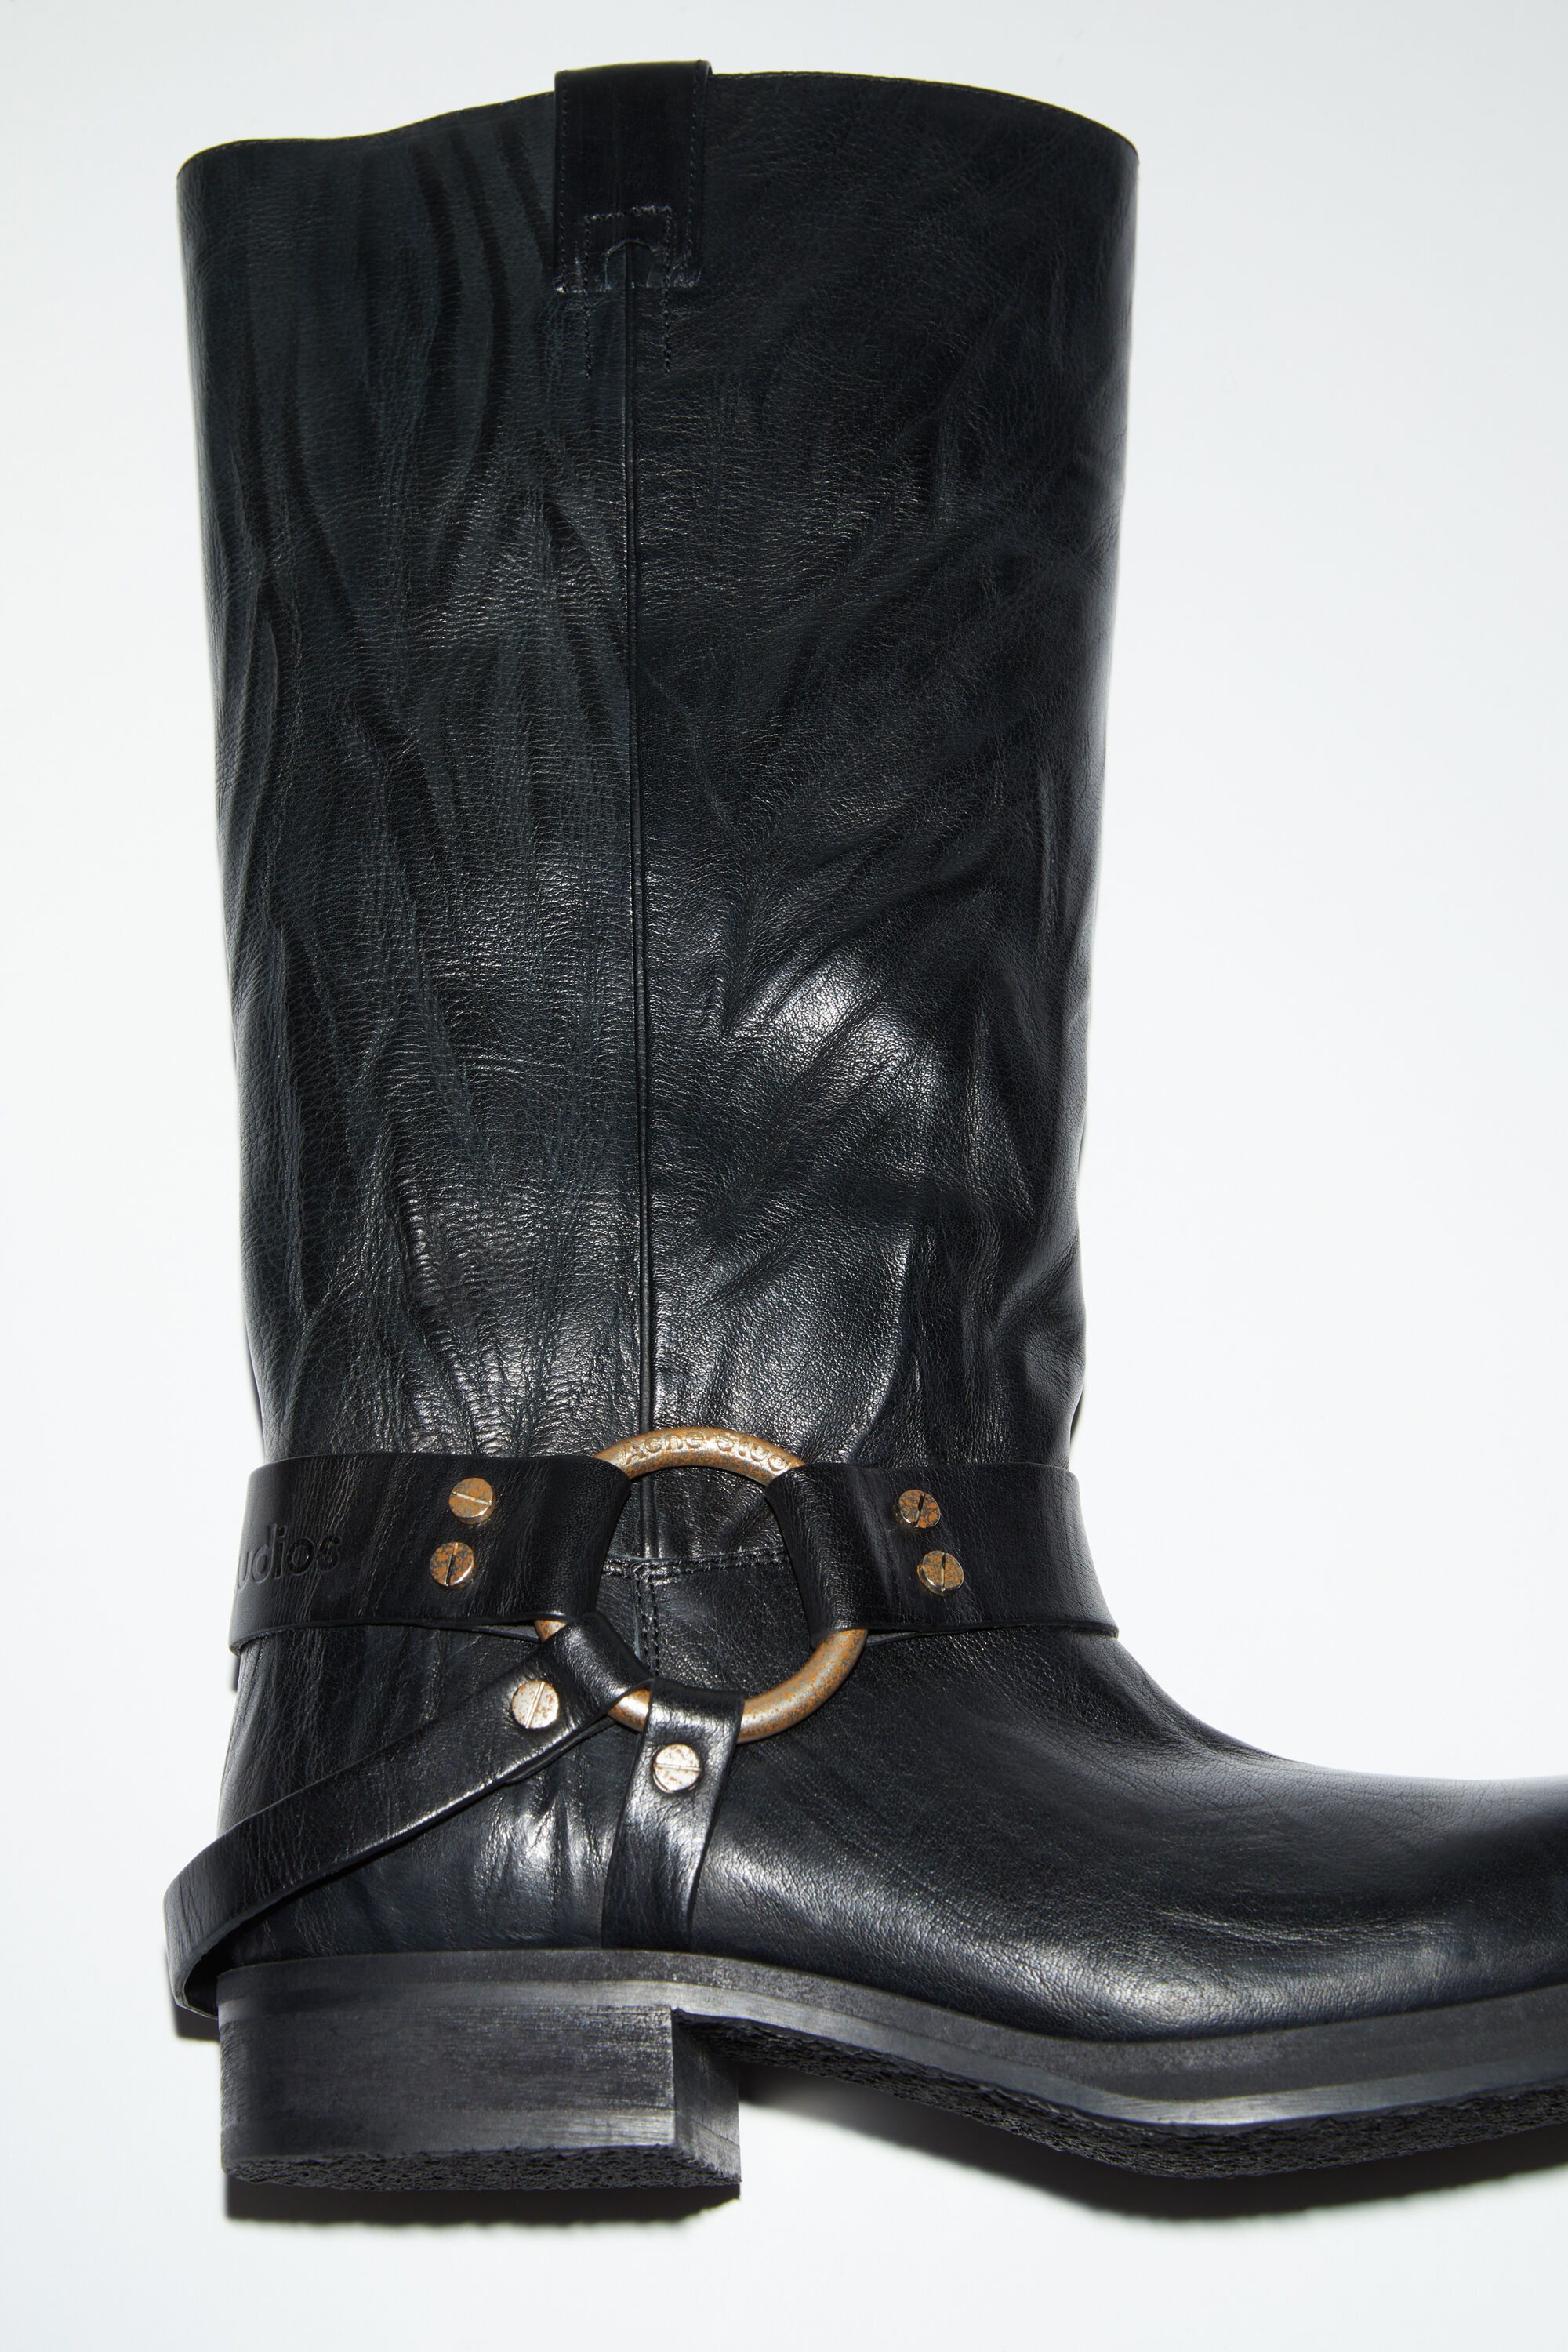 20mm Buckleboots Leather Tall Boots